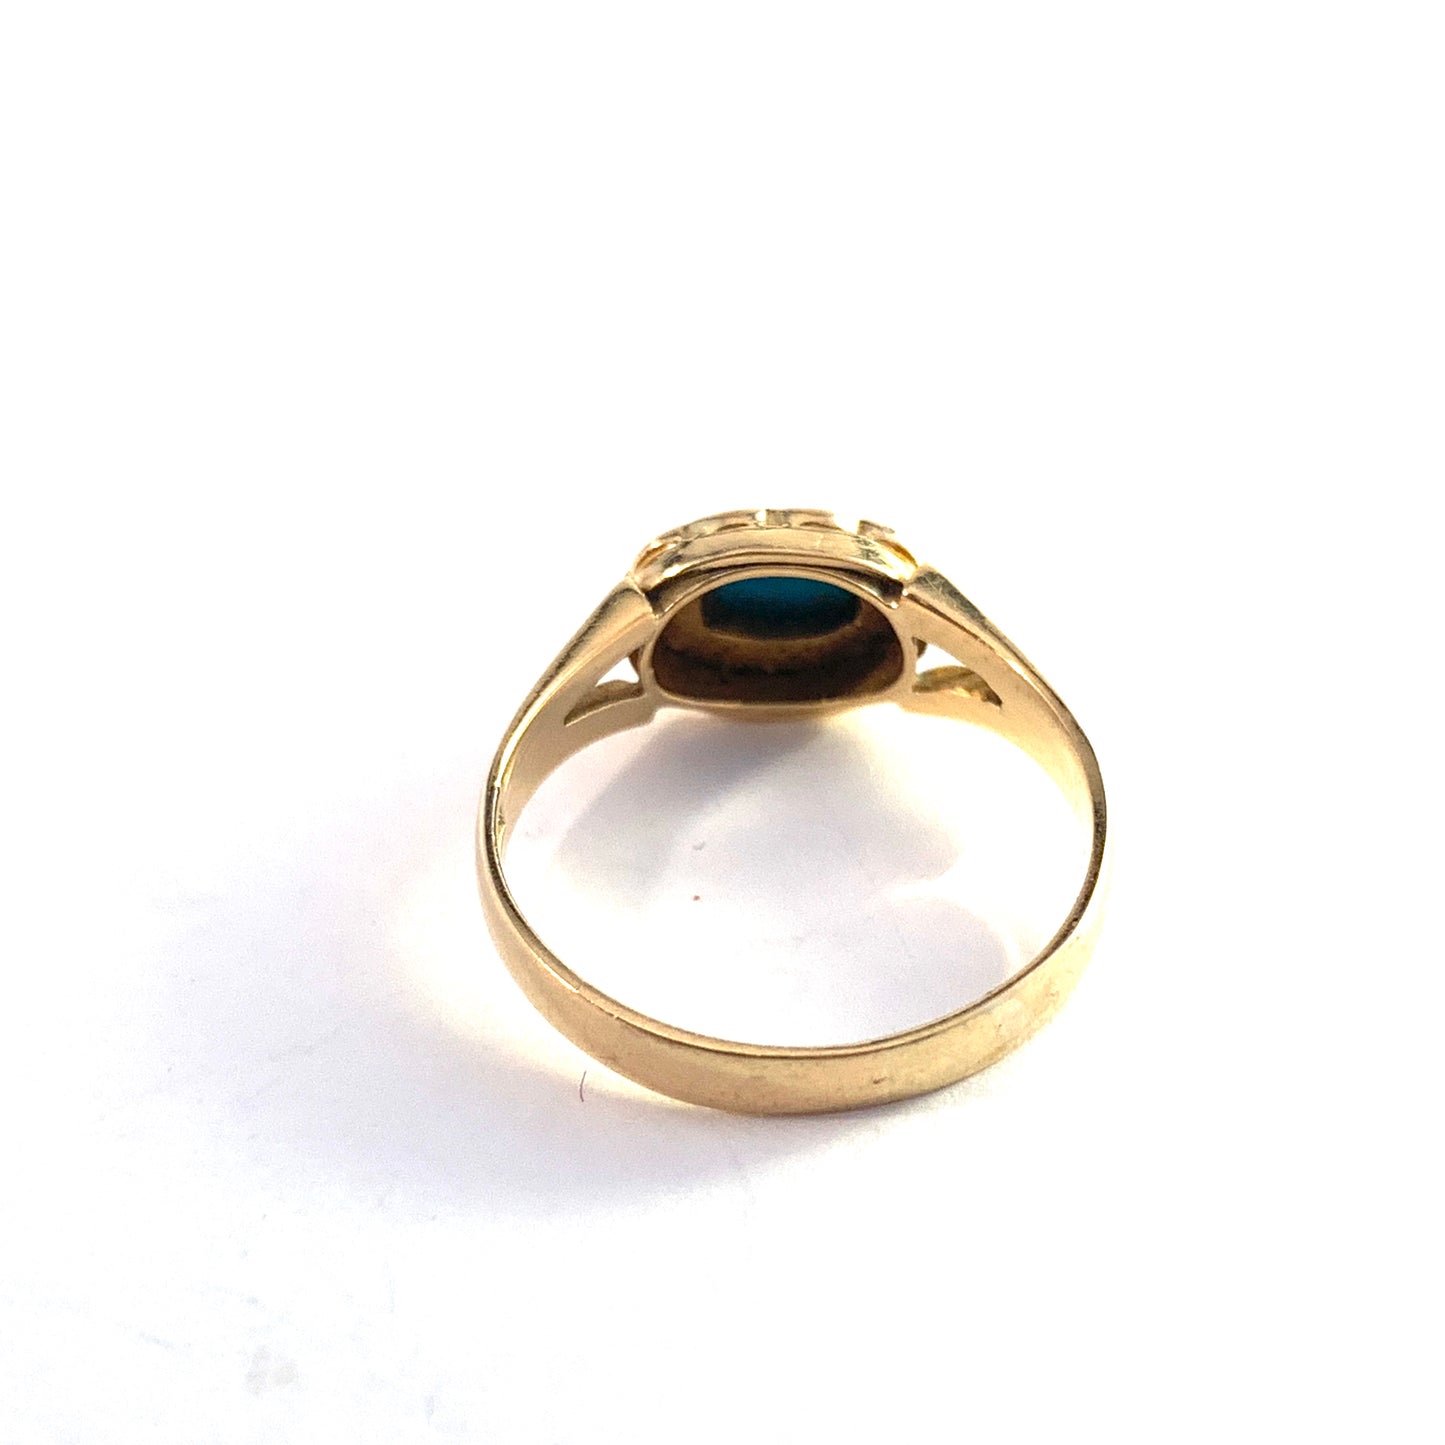 Isak Mobeck & Sons, Sweden 1954. Vintage Mid Century 18k Gold Turquoise Seed Pearl Ring.